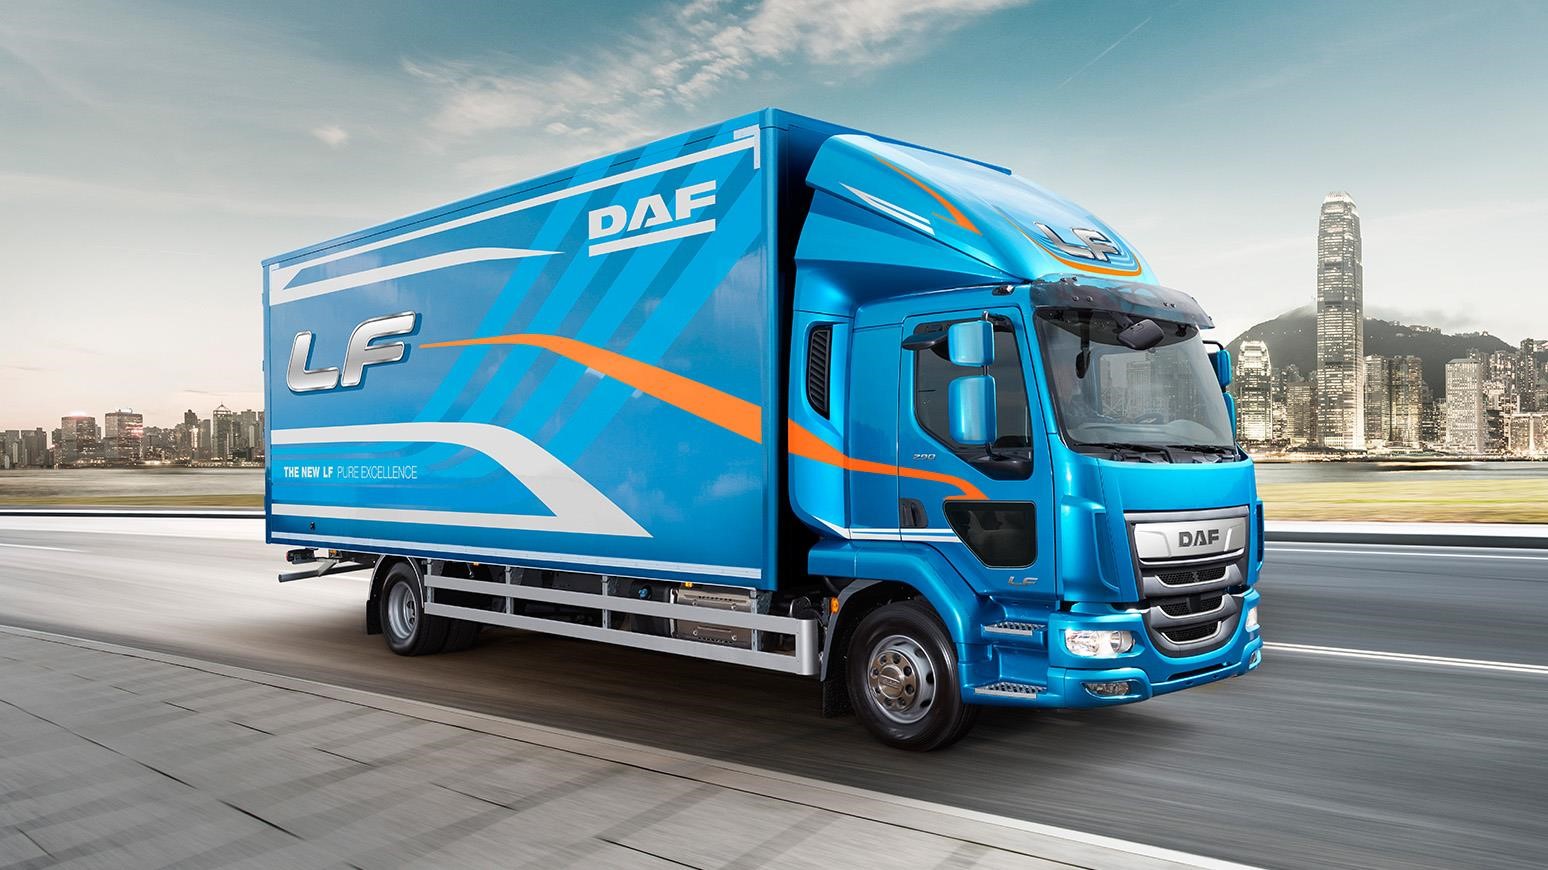 DAF Named Manufacturer Of The Year, LF Series Wins Truck Of The Year At 2019 Commercial Fleet Awards